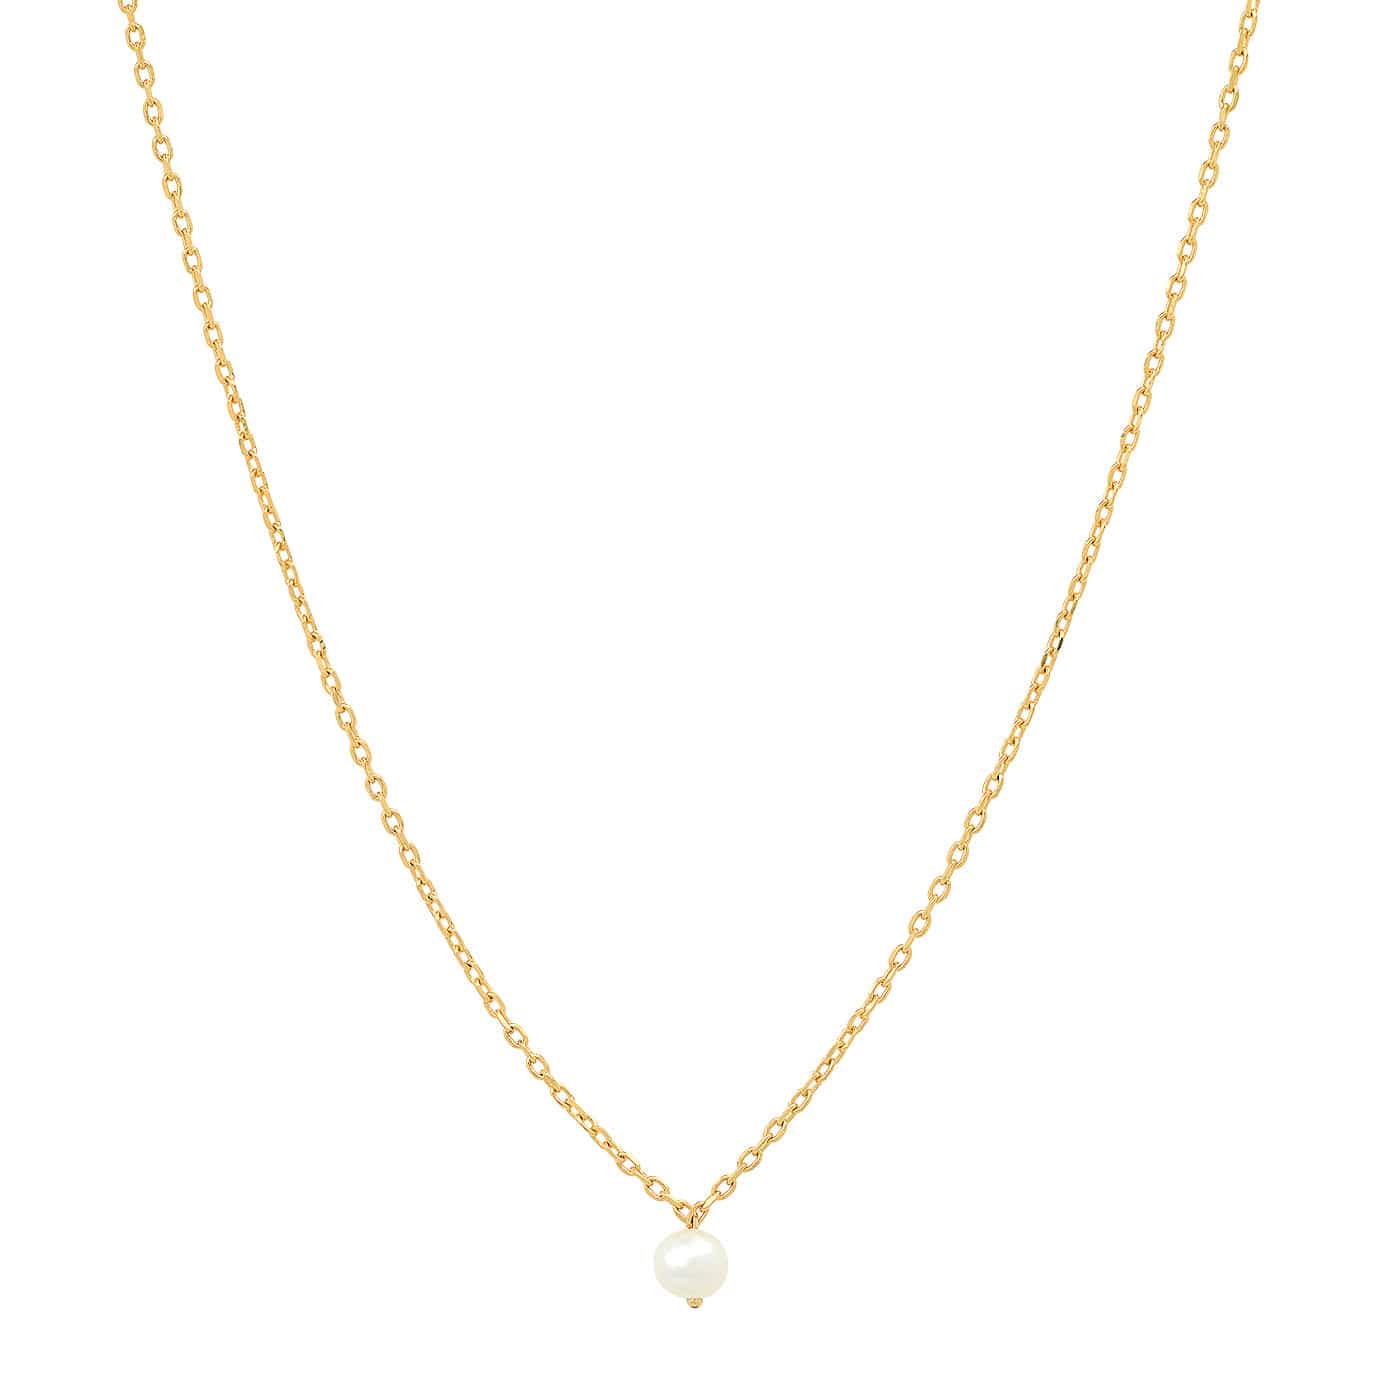 TAI JEWELRY Necklace Gold Delicate Chain With Simple Freshwater Pearl Pendant